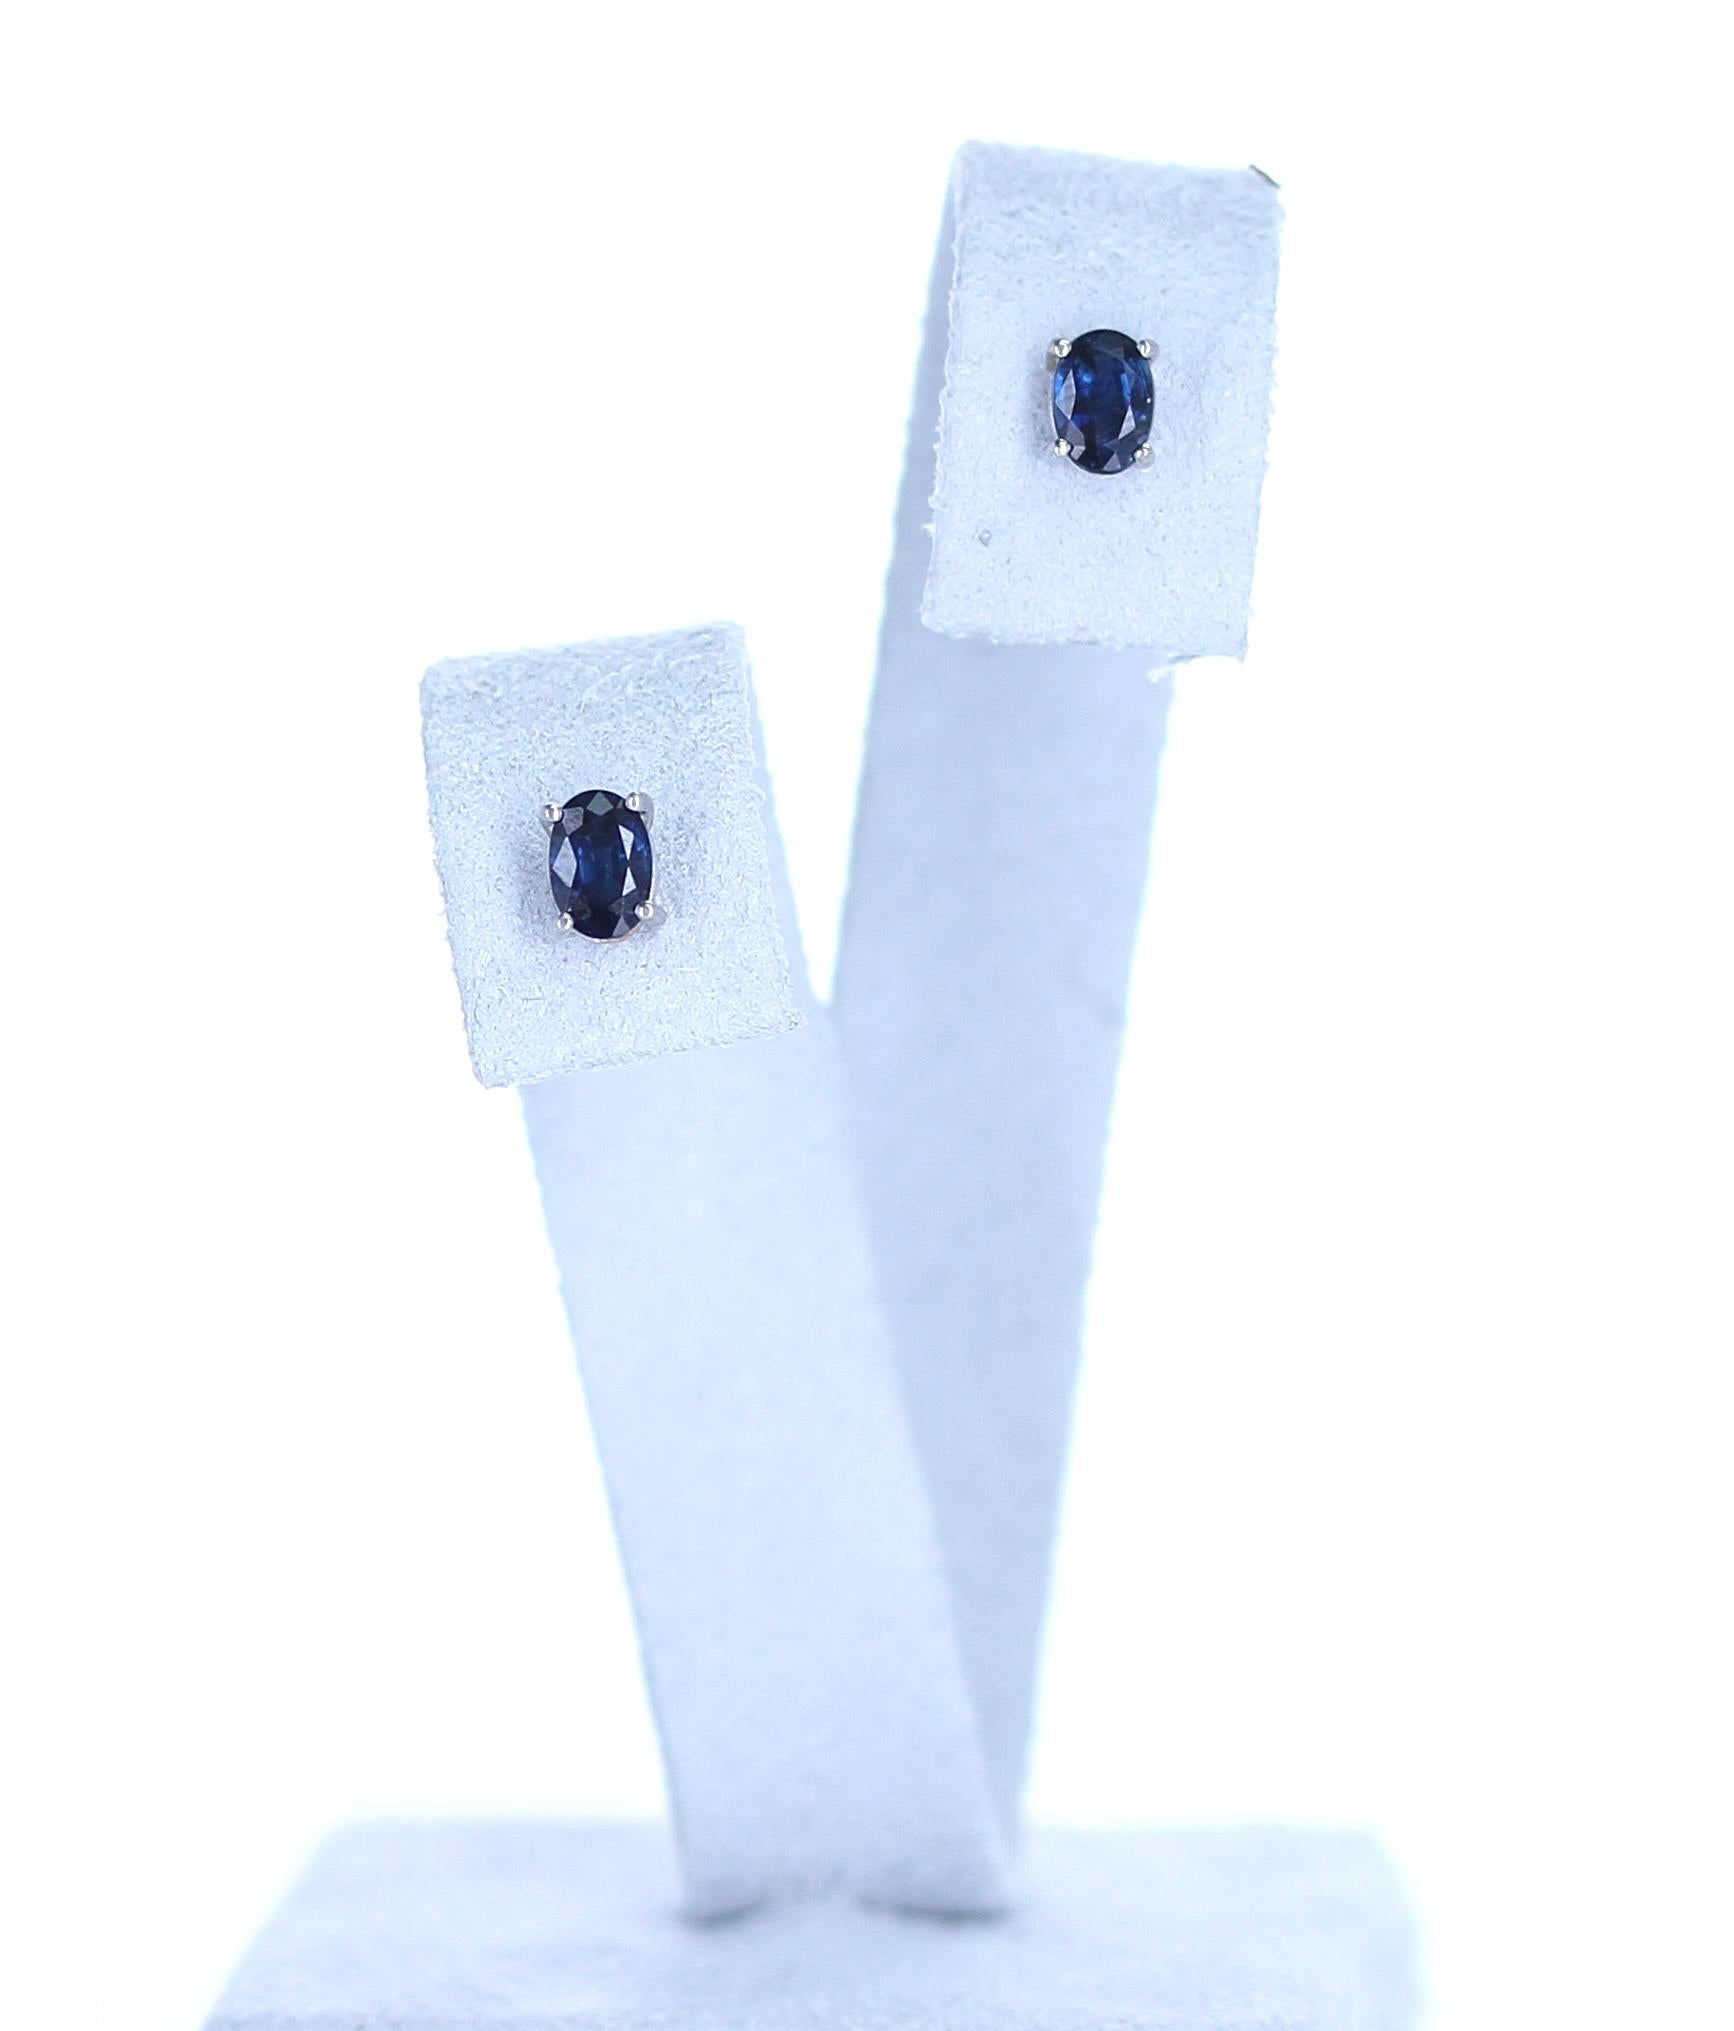 A pair of Blue Sapphire Oval Stud Earrings in 18 Karat White Gold. The sapphires measure 6MM x 4MM. We can also customize the earrings according to your preferences, as per the size of the stone, type of stone, etc. Please contact us for more